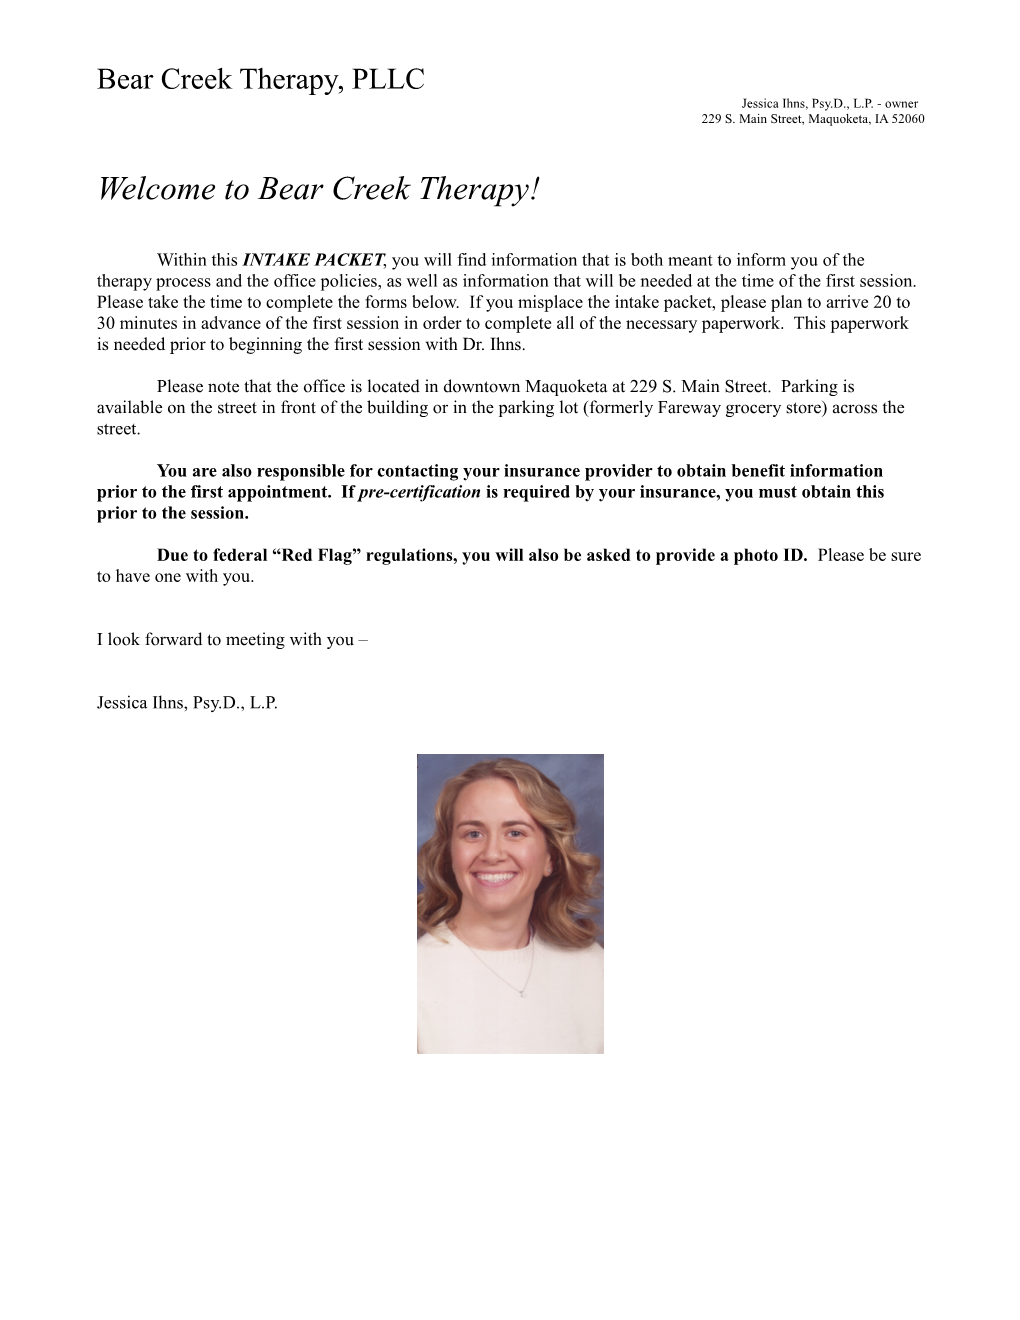 Bear Creek Therapy, PLLC Jessica Ihns, Psy.D., L.P. - Owner